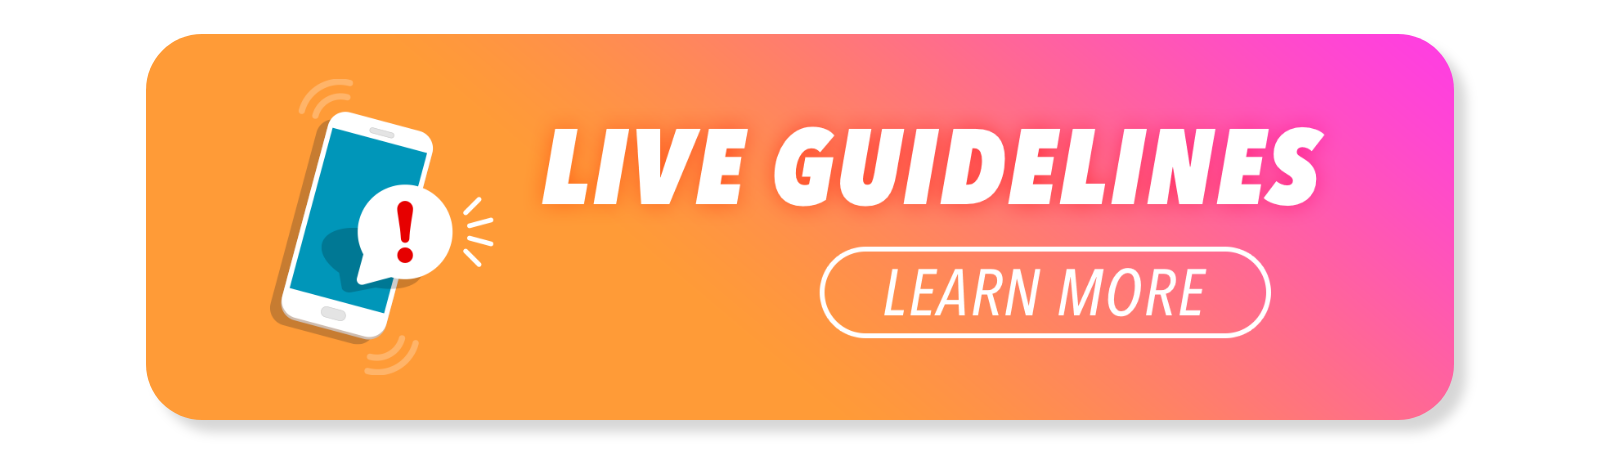 Live Guidelines